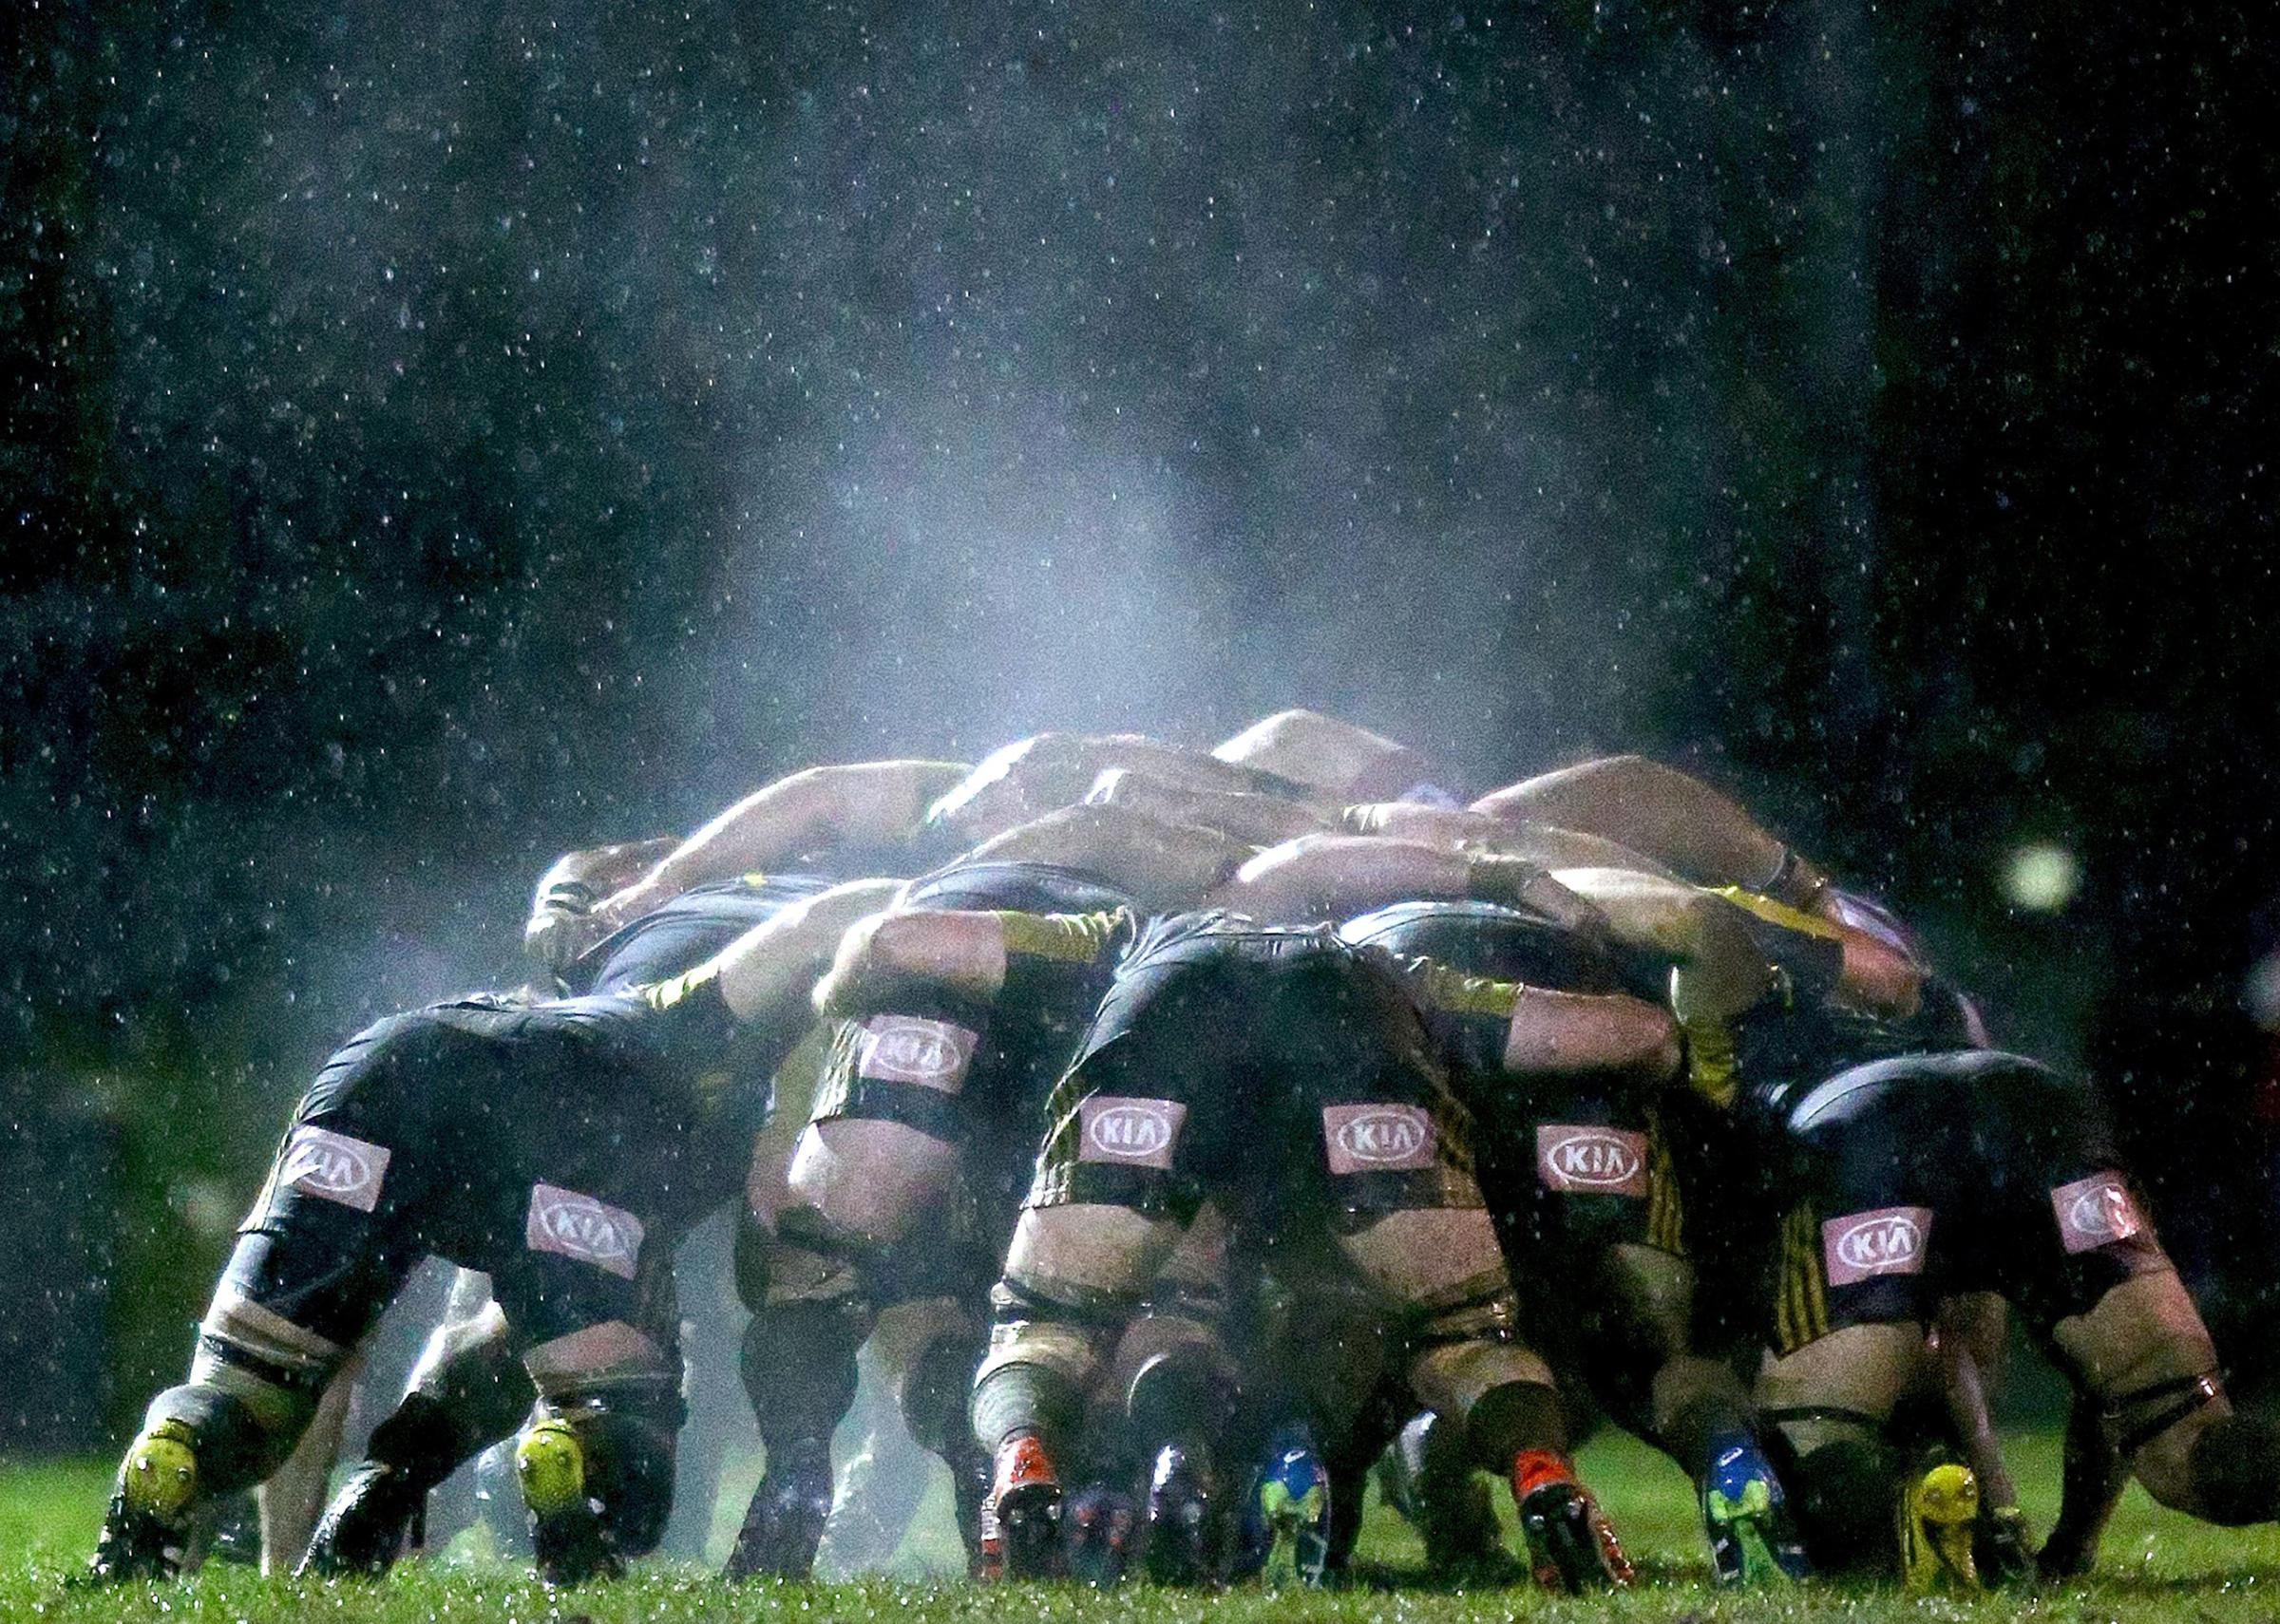 Steam rises from a scrum during the Super Rugby Exhibition match between the Rebels and the Hurricanes at Harlequins Rugby Club in Melbourne, Australia, on June 23, 2016.